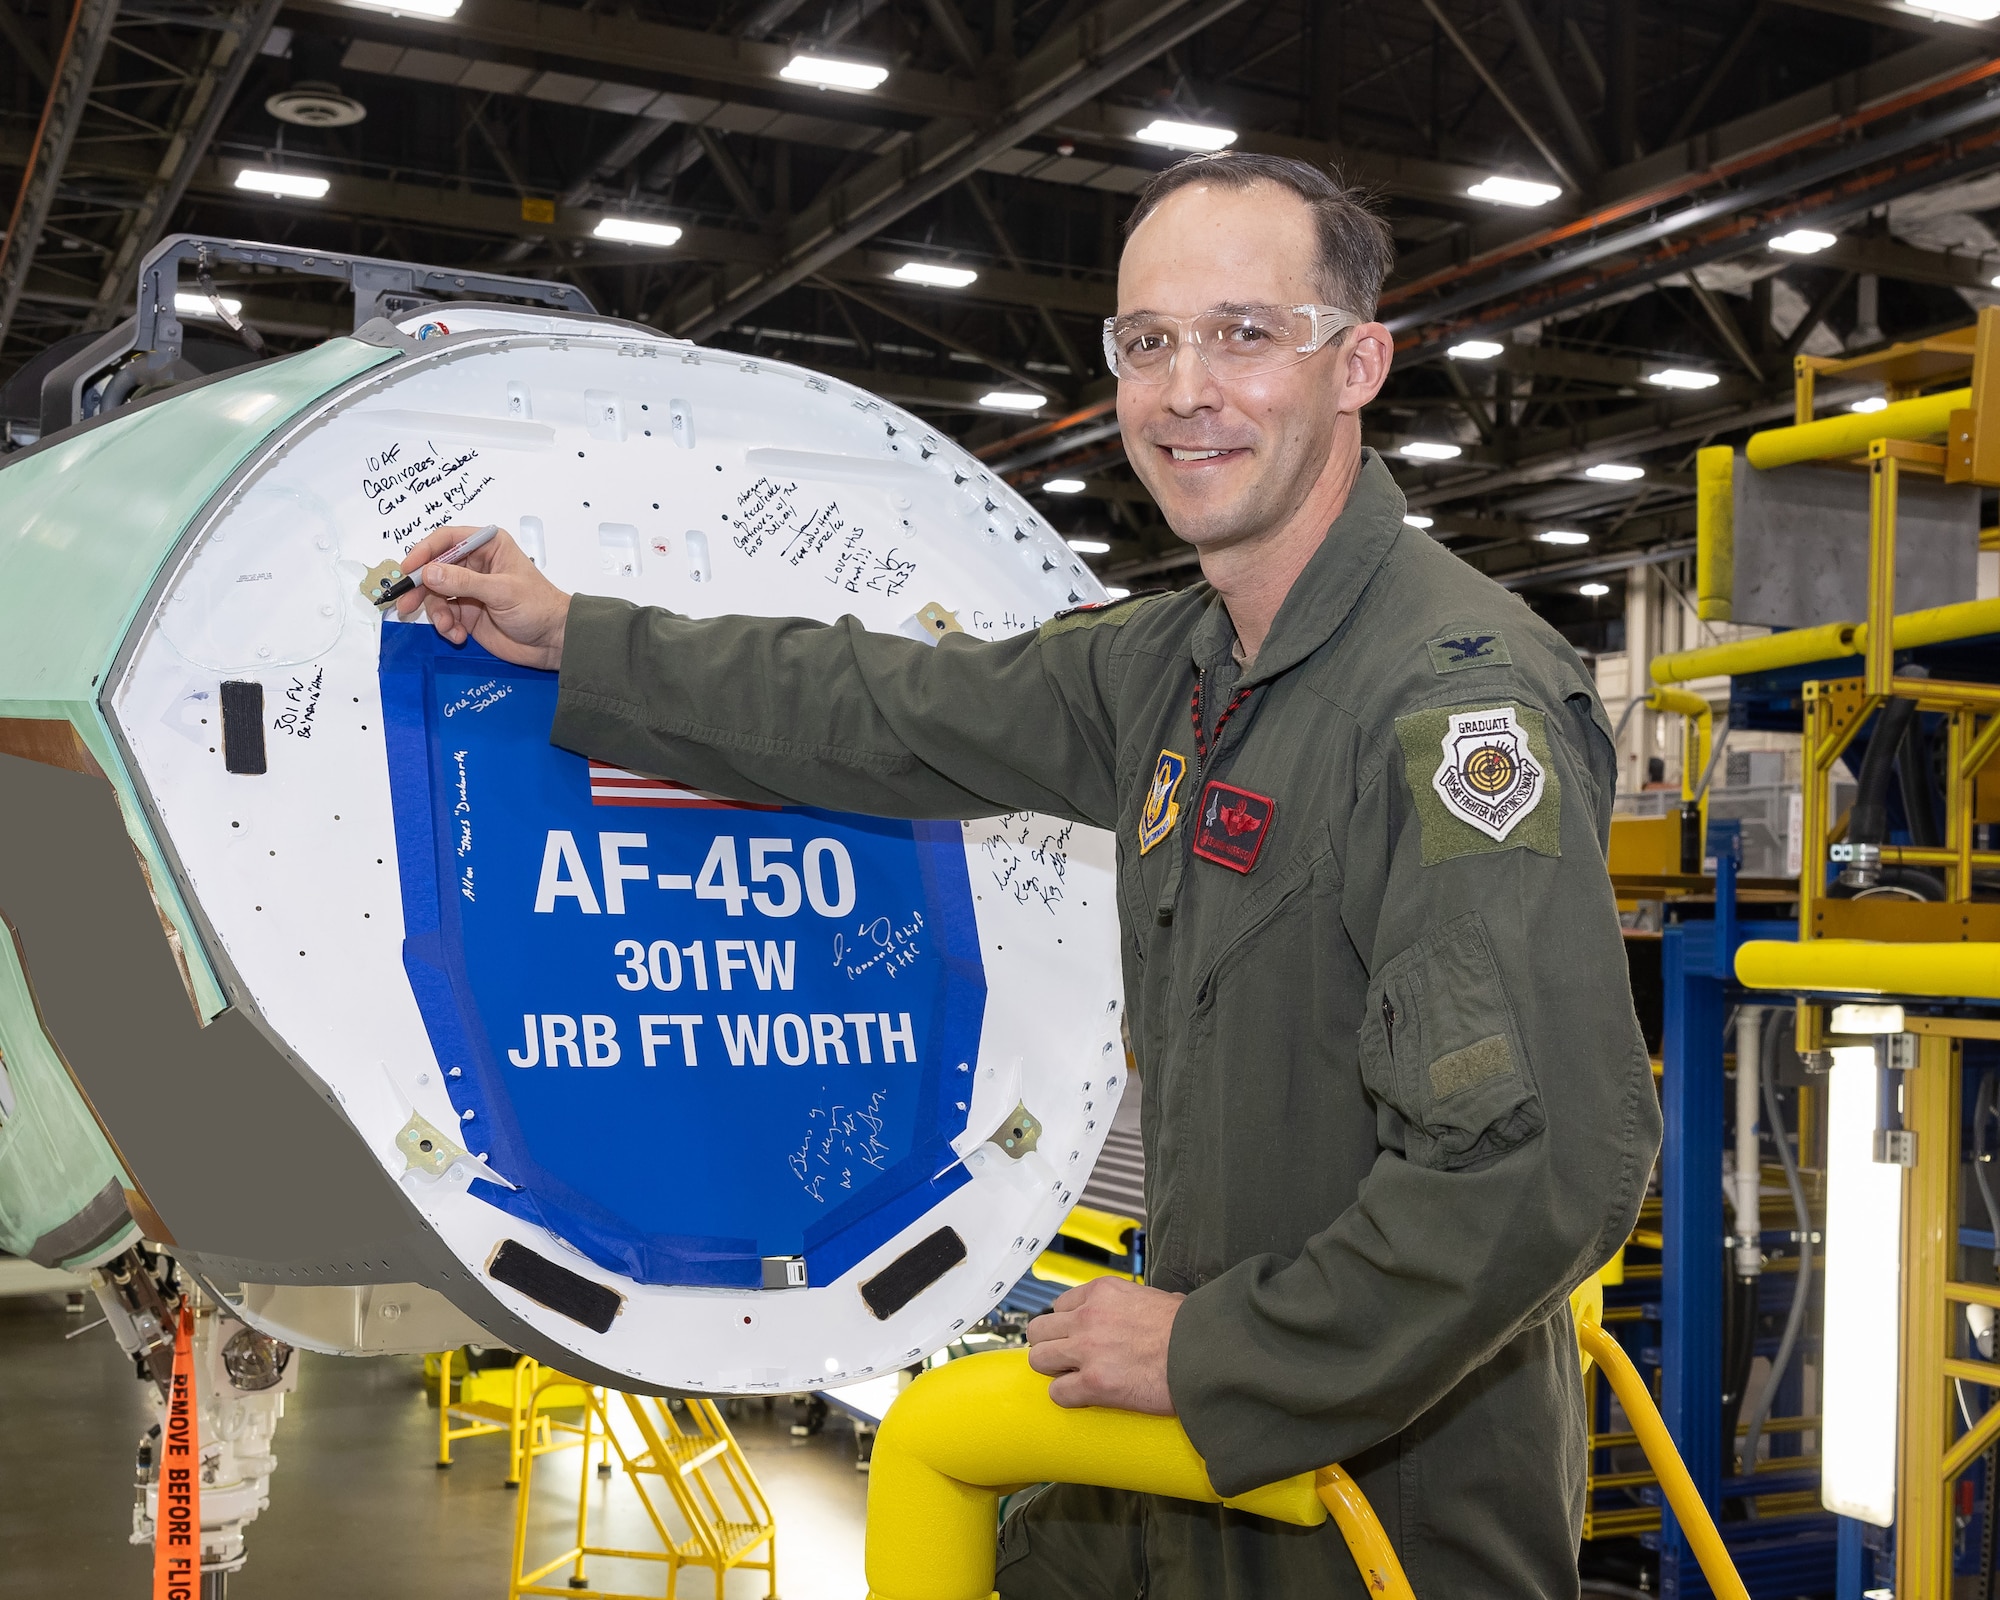 Col. Benjamin R. Harrison, Commander of the 301st Fighter Wing, etches a pivotal moment into the legacy of his wing, signing the bulkhead of the first F-35 Lightning II designated for the 301st. This symbolic gesture ushers in a new era of advanced combat readiness and technological prowess for the wing. (Photos courtesy of Lockheed Martin Aeronautics Company)